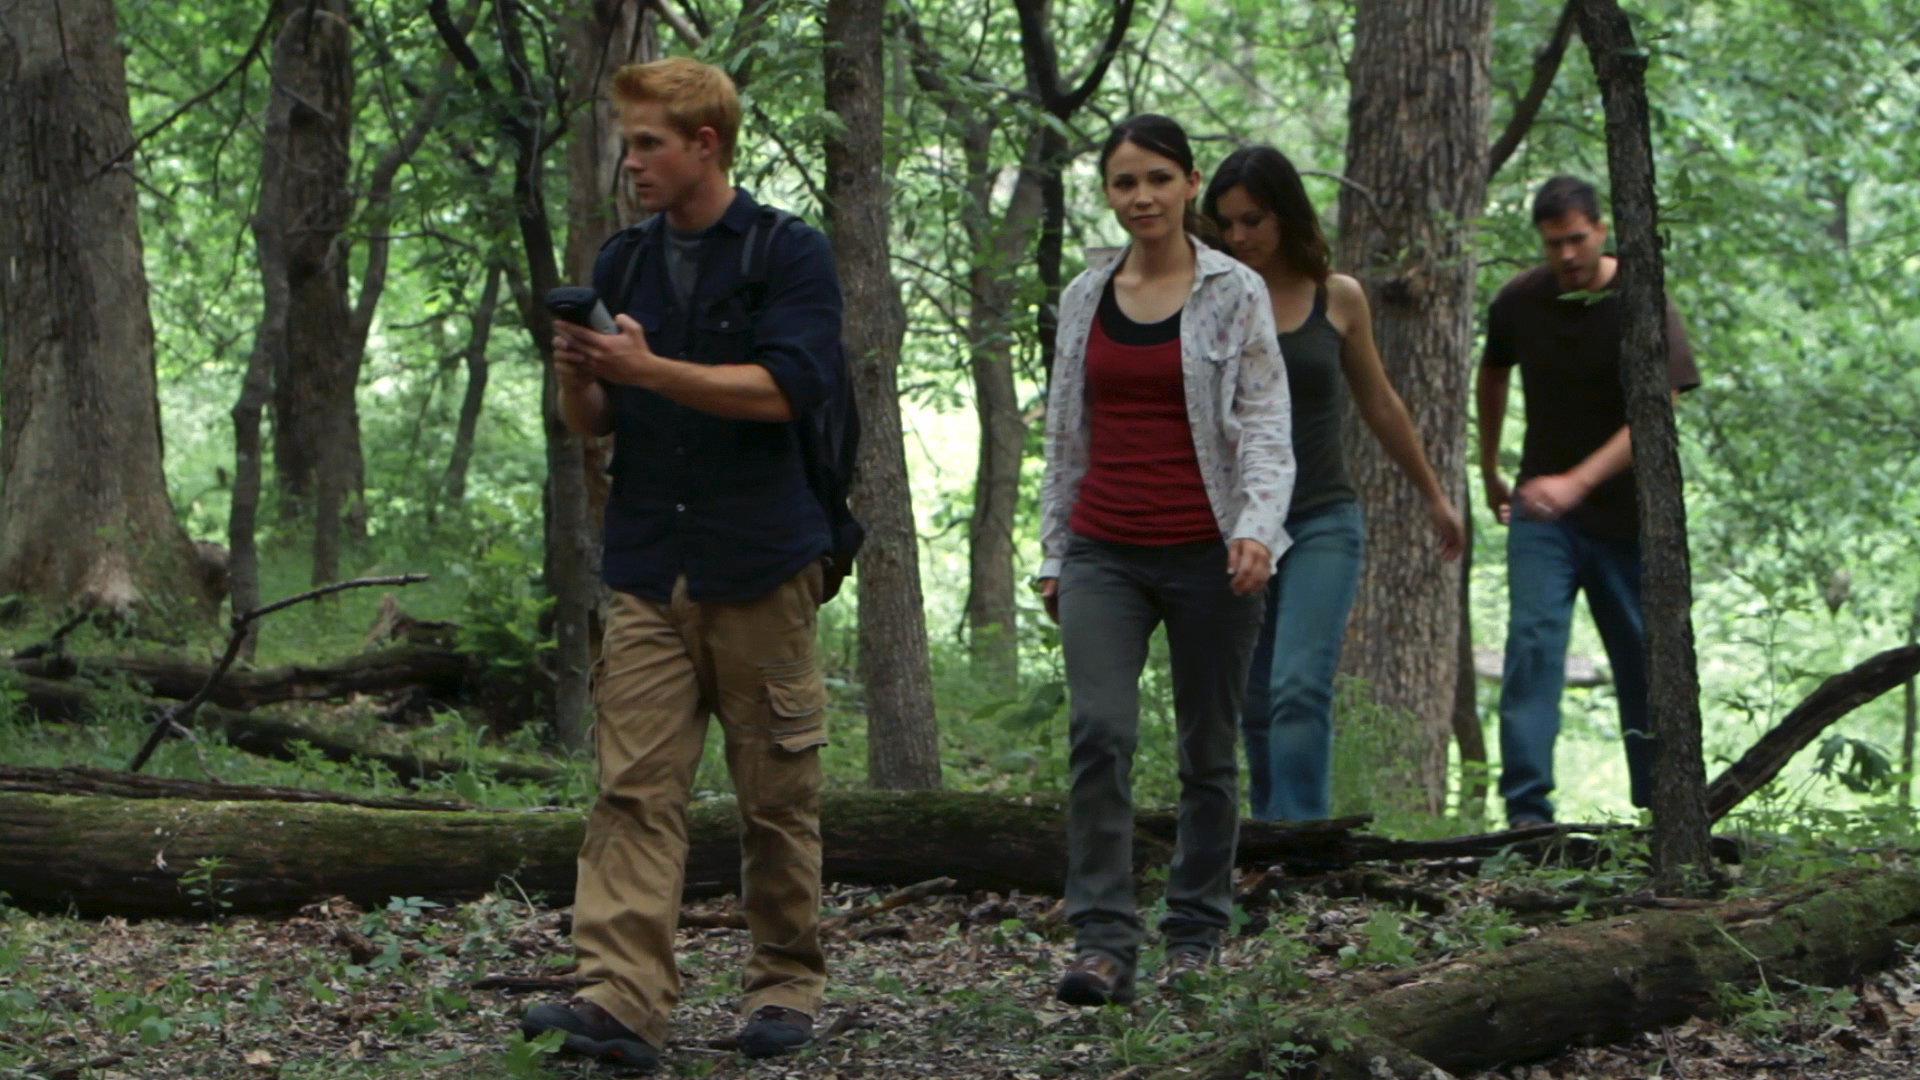 Heather Gornall, Andrew Olson, Mischa McCortney and Konrad Case in The Survival Game (2012)